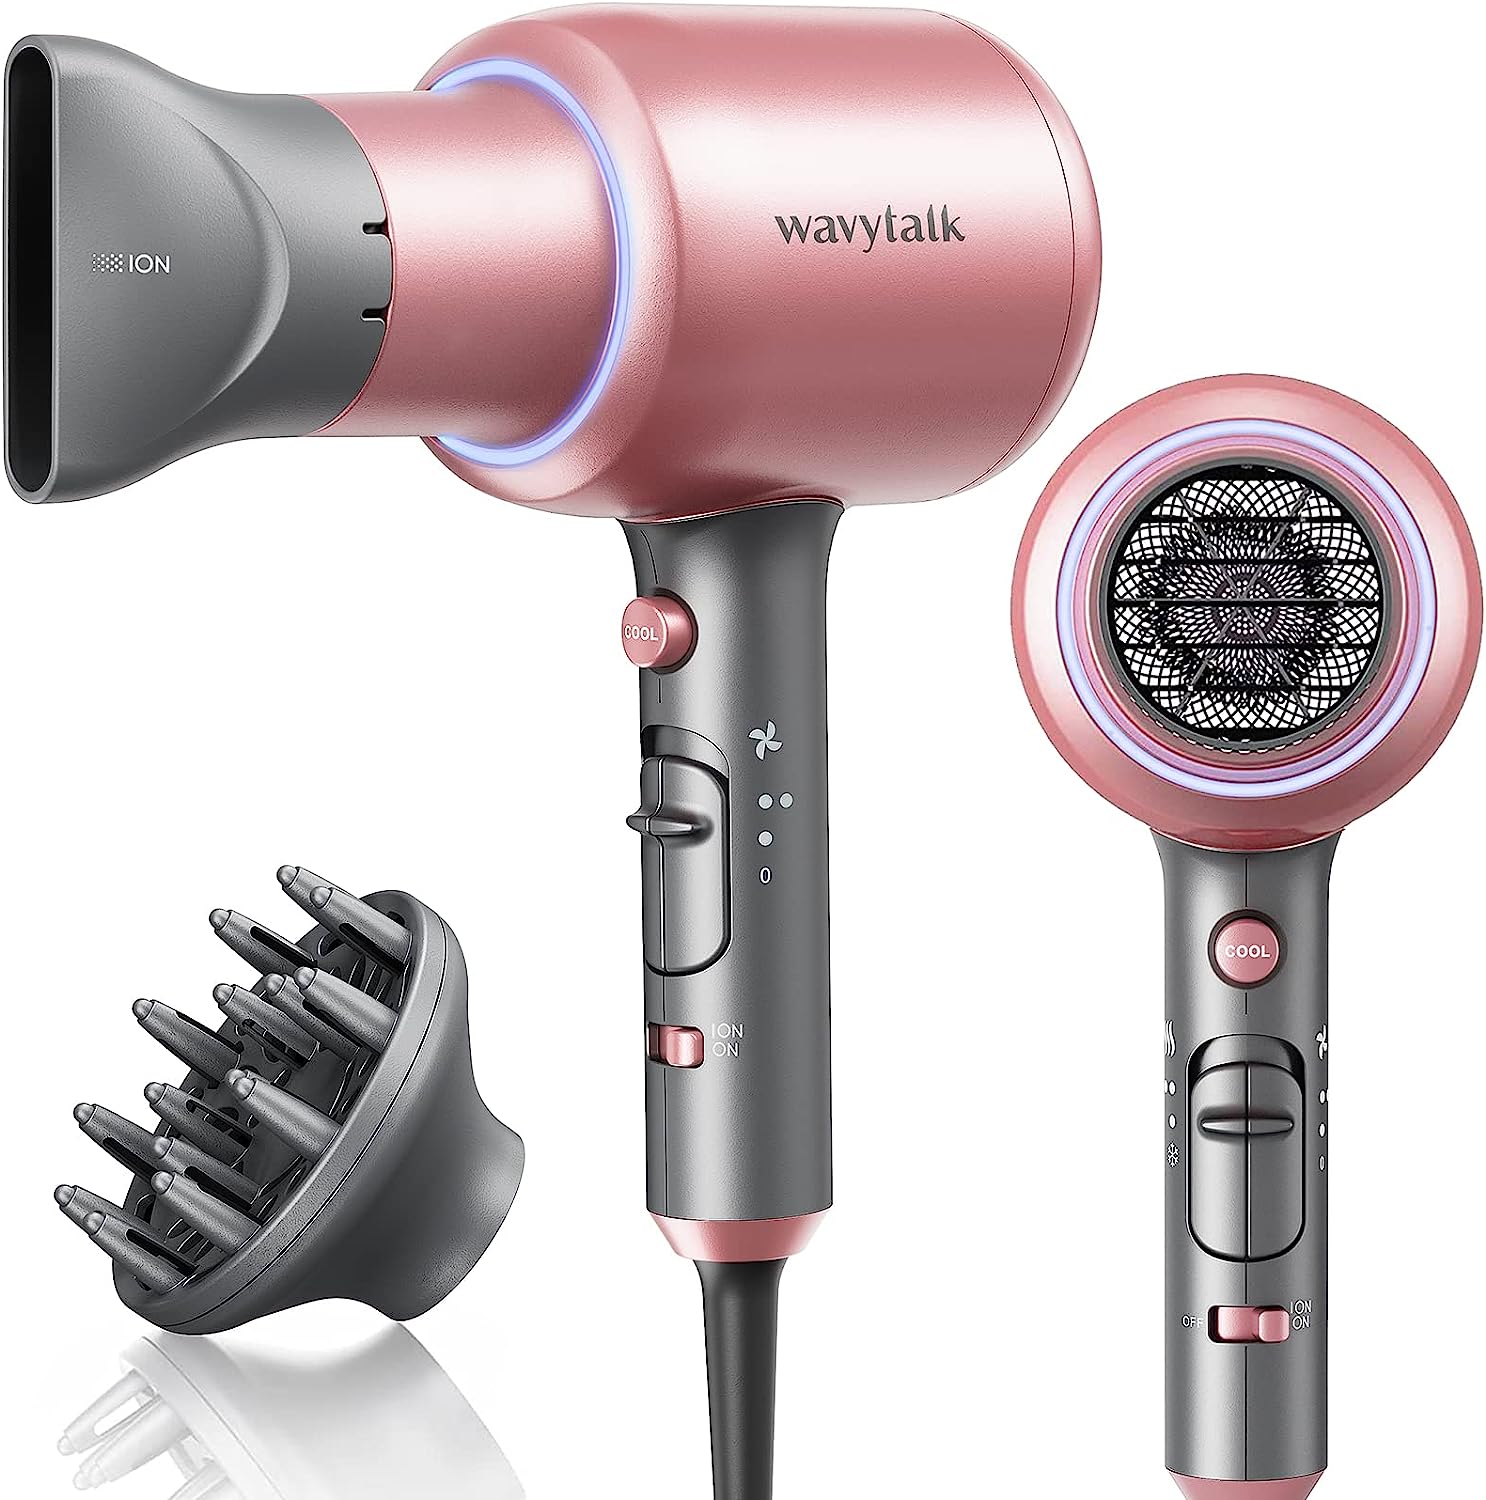 Wavytalk Professional Ionic Hair Dryer Blow Dryer with [...]